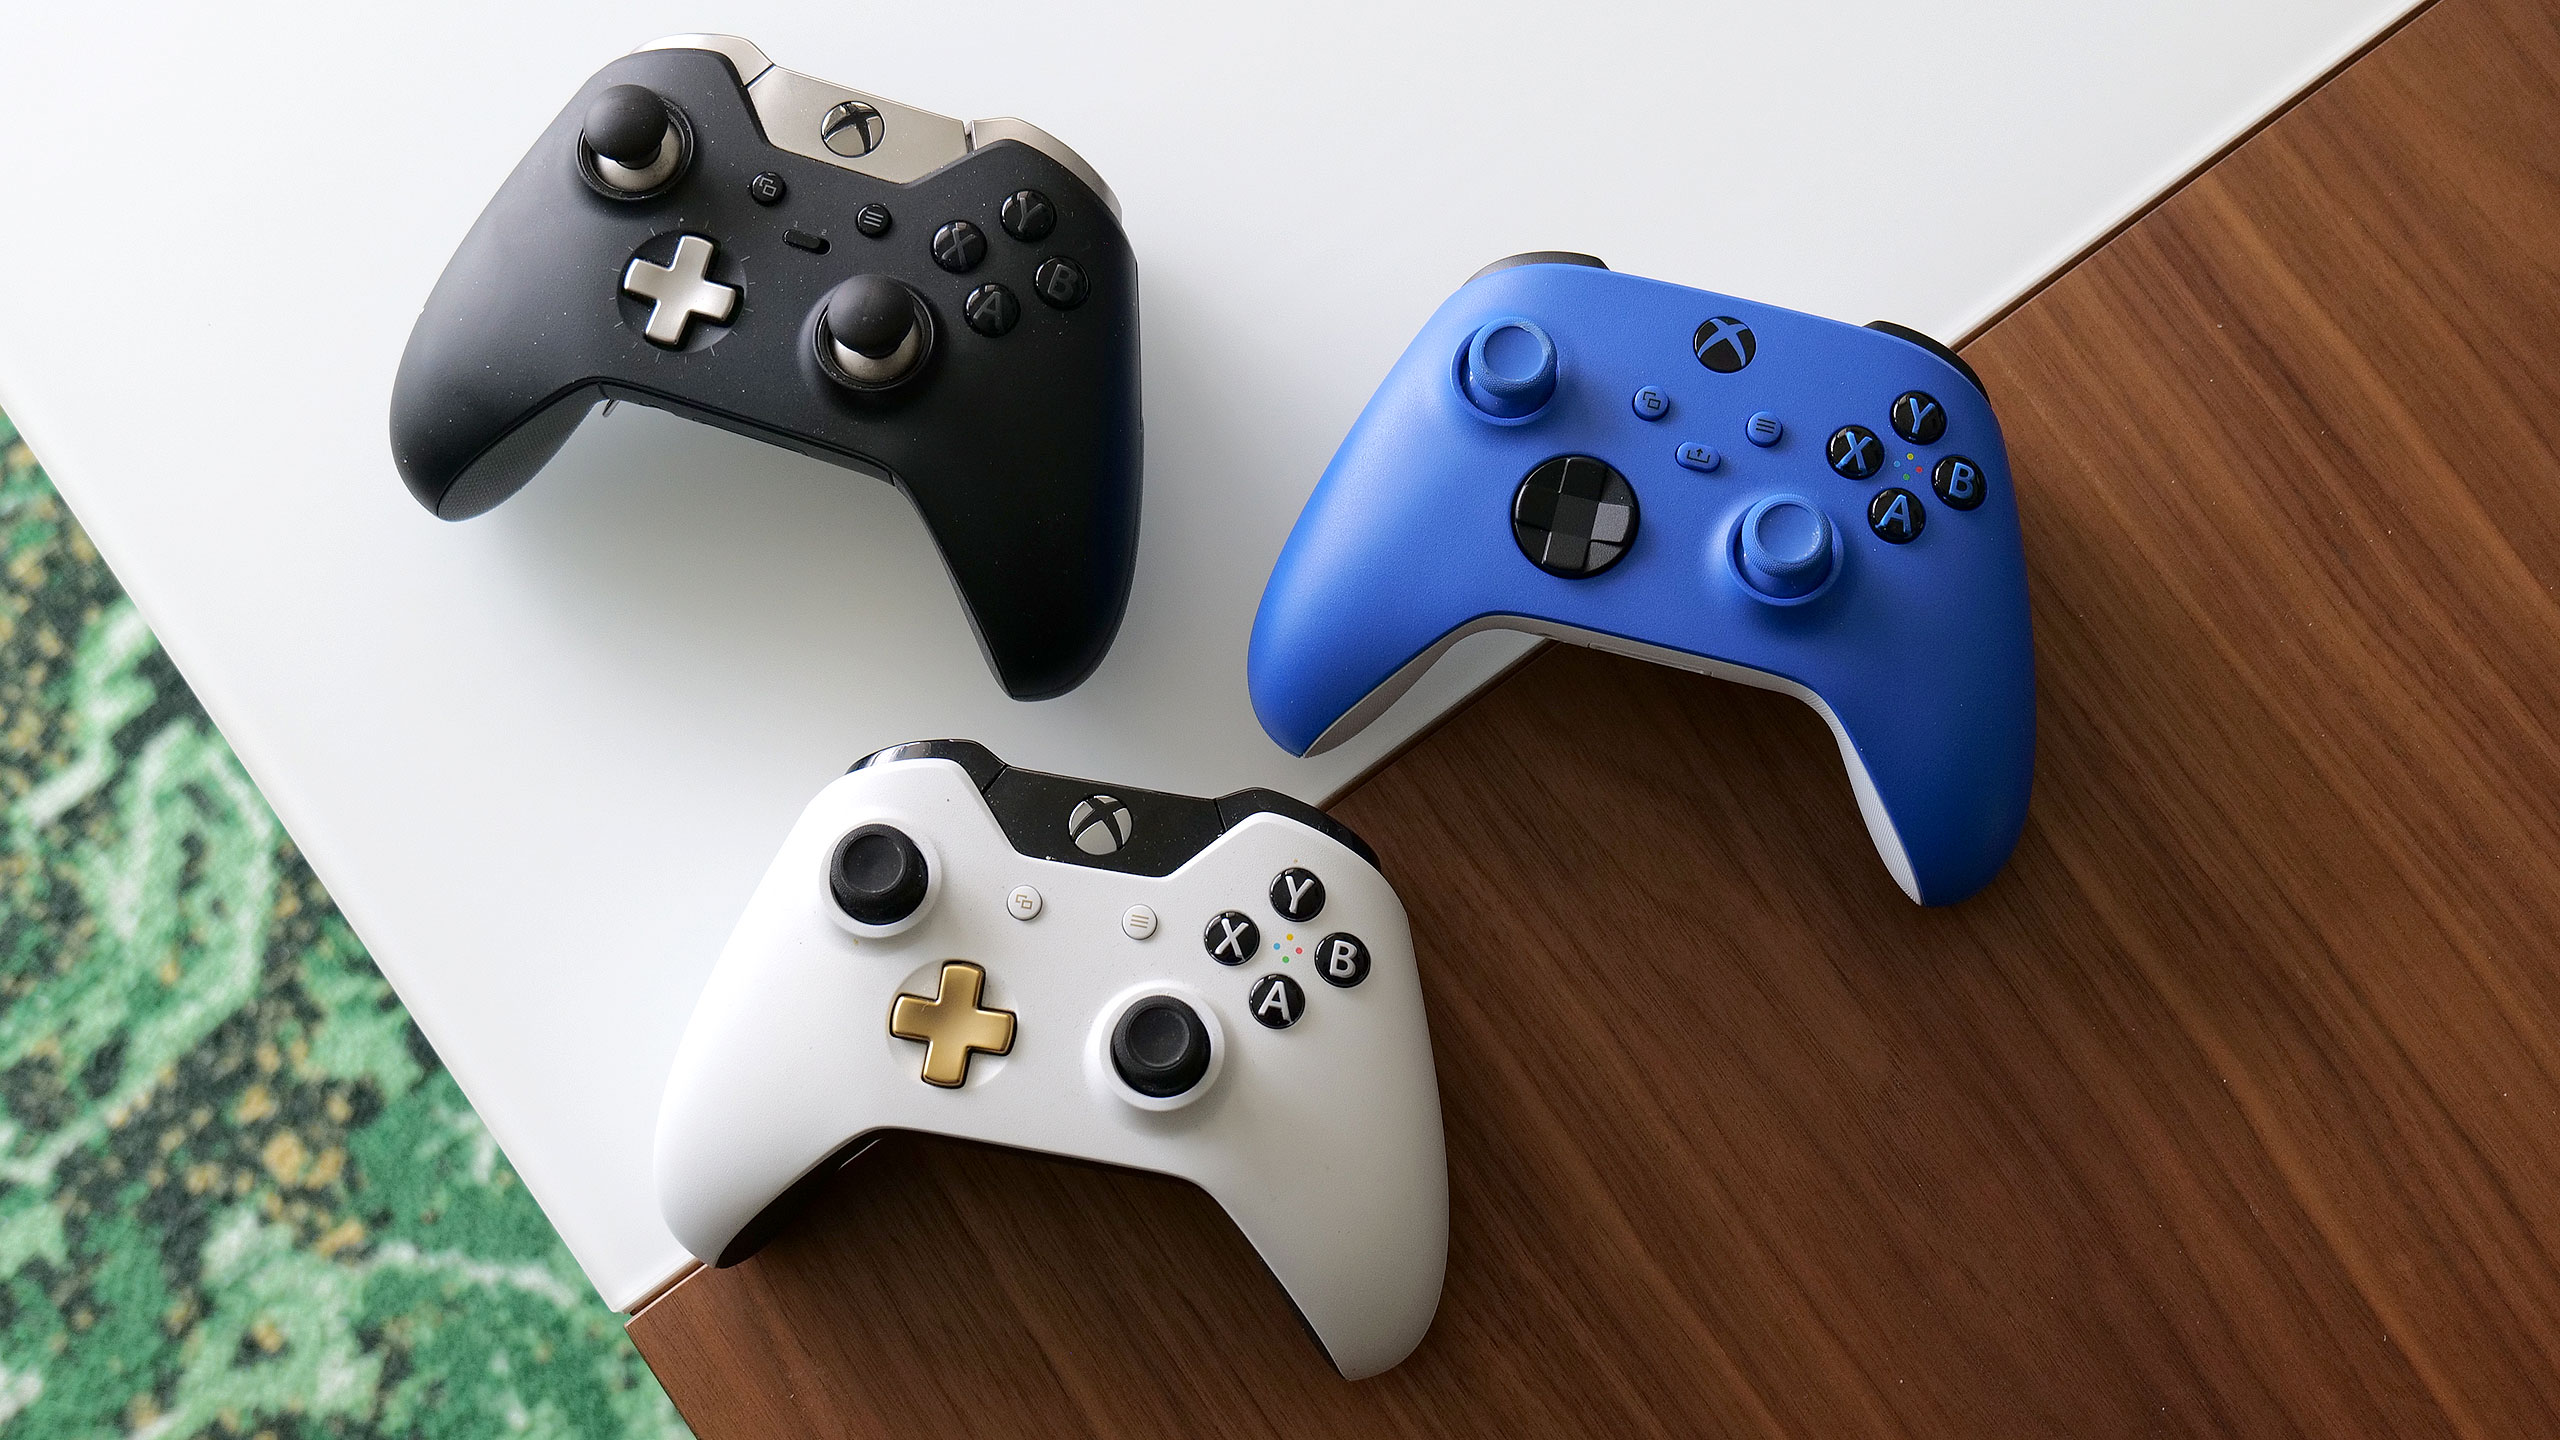 By creating an Xbox laptop with native support for the Xbox Wireless Controller, Microsoft could further cement its gamepad as the controller of choice on both consoles and PCs.  (Photo: Sam Rutherford)